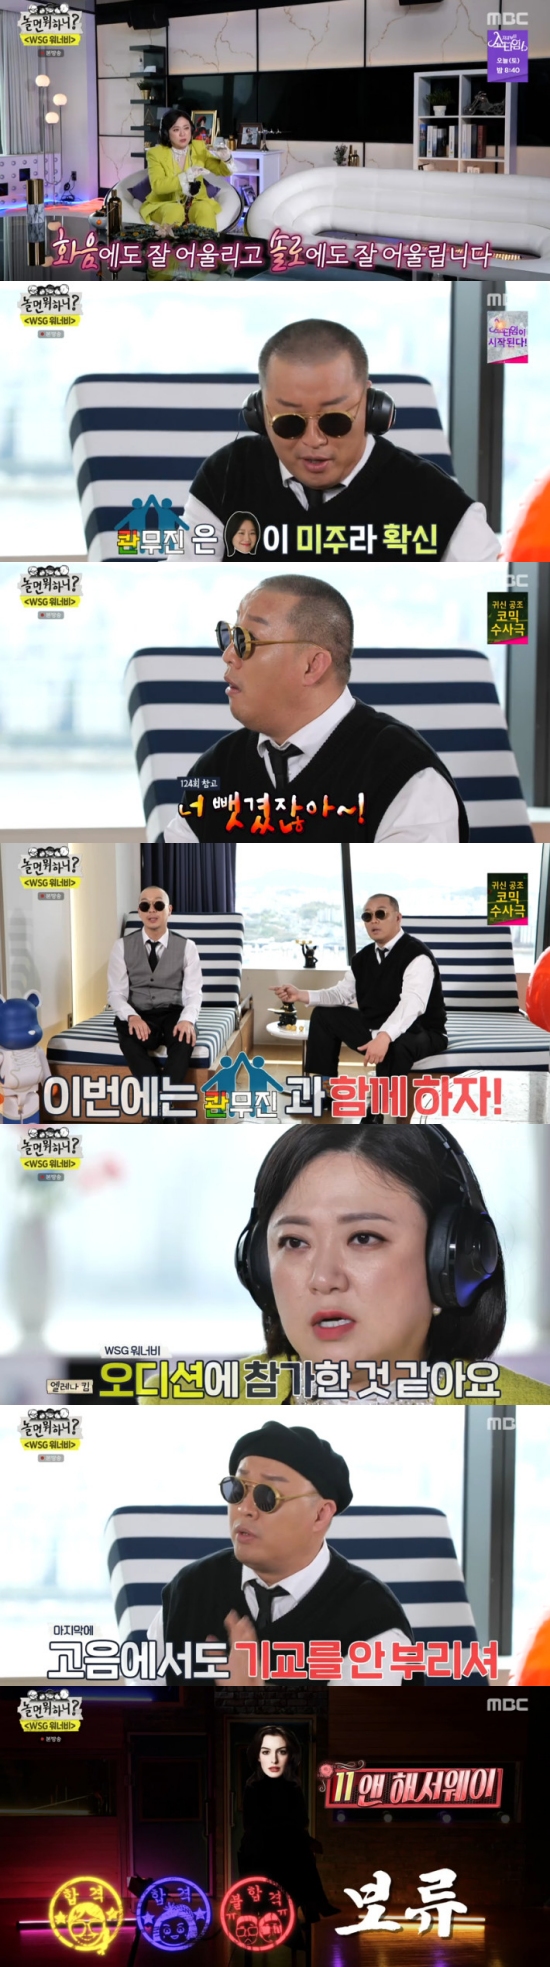 The identity of trot singer Yonja Kim has been revealed.On MBC Hangout with Yo broadcasted on the 30th, WSG Wannabe featured on the feature, while Yonja Kim was eliminated.Haha said, I decided on the first interview. I should have my color.MSG Wannabes are also good at singing, said Yoo Jae-Suk. They can go to their ears.The color of the voice, it suits me, he said.Since then, Gong Hyo-jin has been enthusiastic about Girls Generations The World I Met Again and Acceptance with a clear tone and solid singing skills.Haha was convinced that the identity of Gong Hyo-jin was the Americas, and admired it, saying, The Americas has sharpened the sword.Kim Sook praised it, saying, It suits you well even in the fire and it suits you well when you solo. Jeong Jun-ha said, The beauty cant be dropped. Lets take it from the antenna this opportunity.I did not even have a chance, so lets join together in Quanmujin this time, Haha said.Anne Hathaway chose Lee So-ras Proposal and showed off her distinctive charming tone.The judges asked me to sing another song in my regret, and Anne Hathaway called Jang Hye-jins One Late Night in 1994.I dont know, Ill go as I feel, Im curious, said Yoo Jae-Suk, who also opted for Acceptance.Kim Sook said: Its not the voice Ive heard before: I think Ive been singing at home and then taking on the Audition with great courage this opportunity.I think he came out to verify my voice. These are the jewels that they have hidden. Jeong Jun-ha said, This selection is a selection that I hope has a personality.I do not think so this time, he said, and eventually Ann Hathaways results were put on hold.Lady Gaga participated in the Audition as For You by Lim Jae-bum, and Yoo Jae-Suk mentioned Yonja Kim as soon as she heard the voice.Yoo Jae-Suk said, I am too big to pick up, and Kim Sook said, Can you put this person in Elena Kim bowl?Yonja Kim received a fire Acceptance from Yoo Jae-Suk and Kim Sook, revealing his identity, and the judges expressed their respect for wanting to hear one more song.Yonja Kim was impressed by Lee Seung-chuls Forget it. Yoo Jae-Suk and Kim Sook said they were already Legend about the reason for the dropout.Photo = MBC Broadcasting Screen